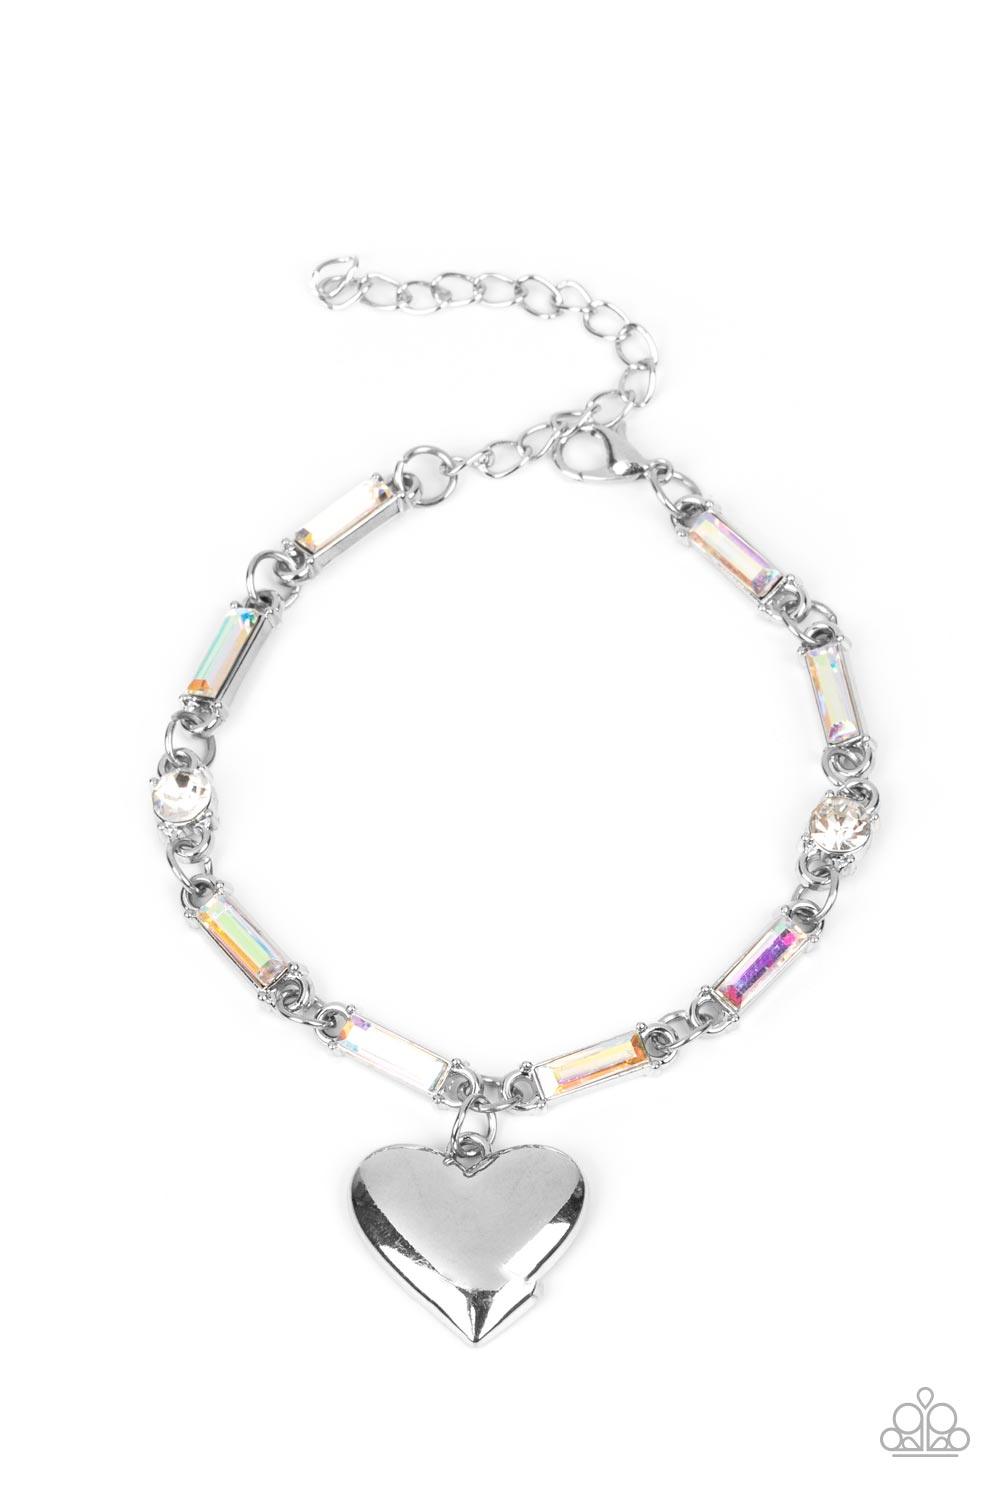 Paparazzi Accessories Sweetheart Secrets - Multi Encased in sleek silver fittings, classic white rhinestones and emerald cut iridescent rhinestones delicately link into a sparkly chain around the wrist. A shiny silver heart charm swings from the glittery